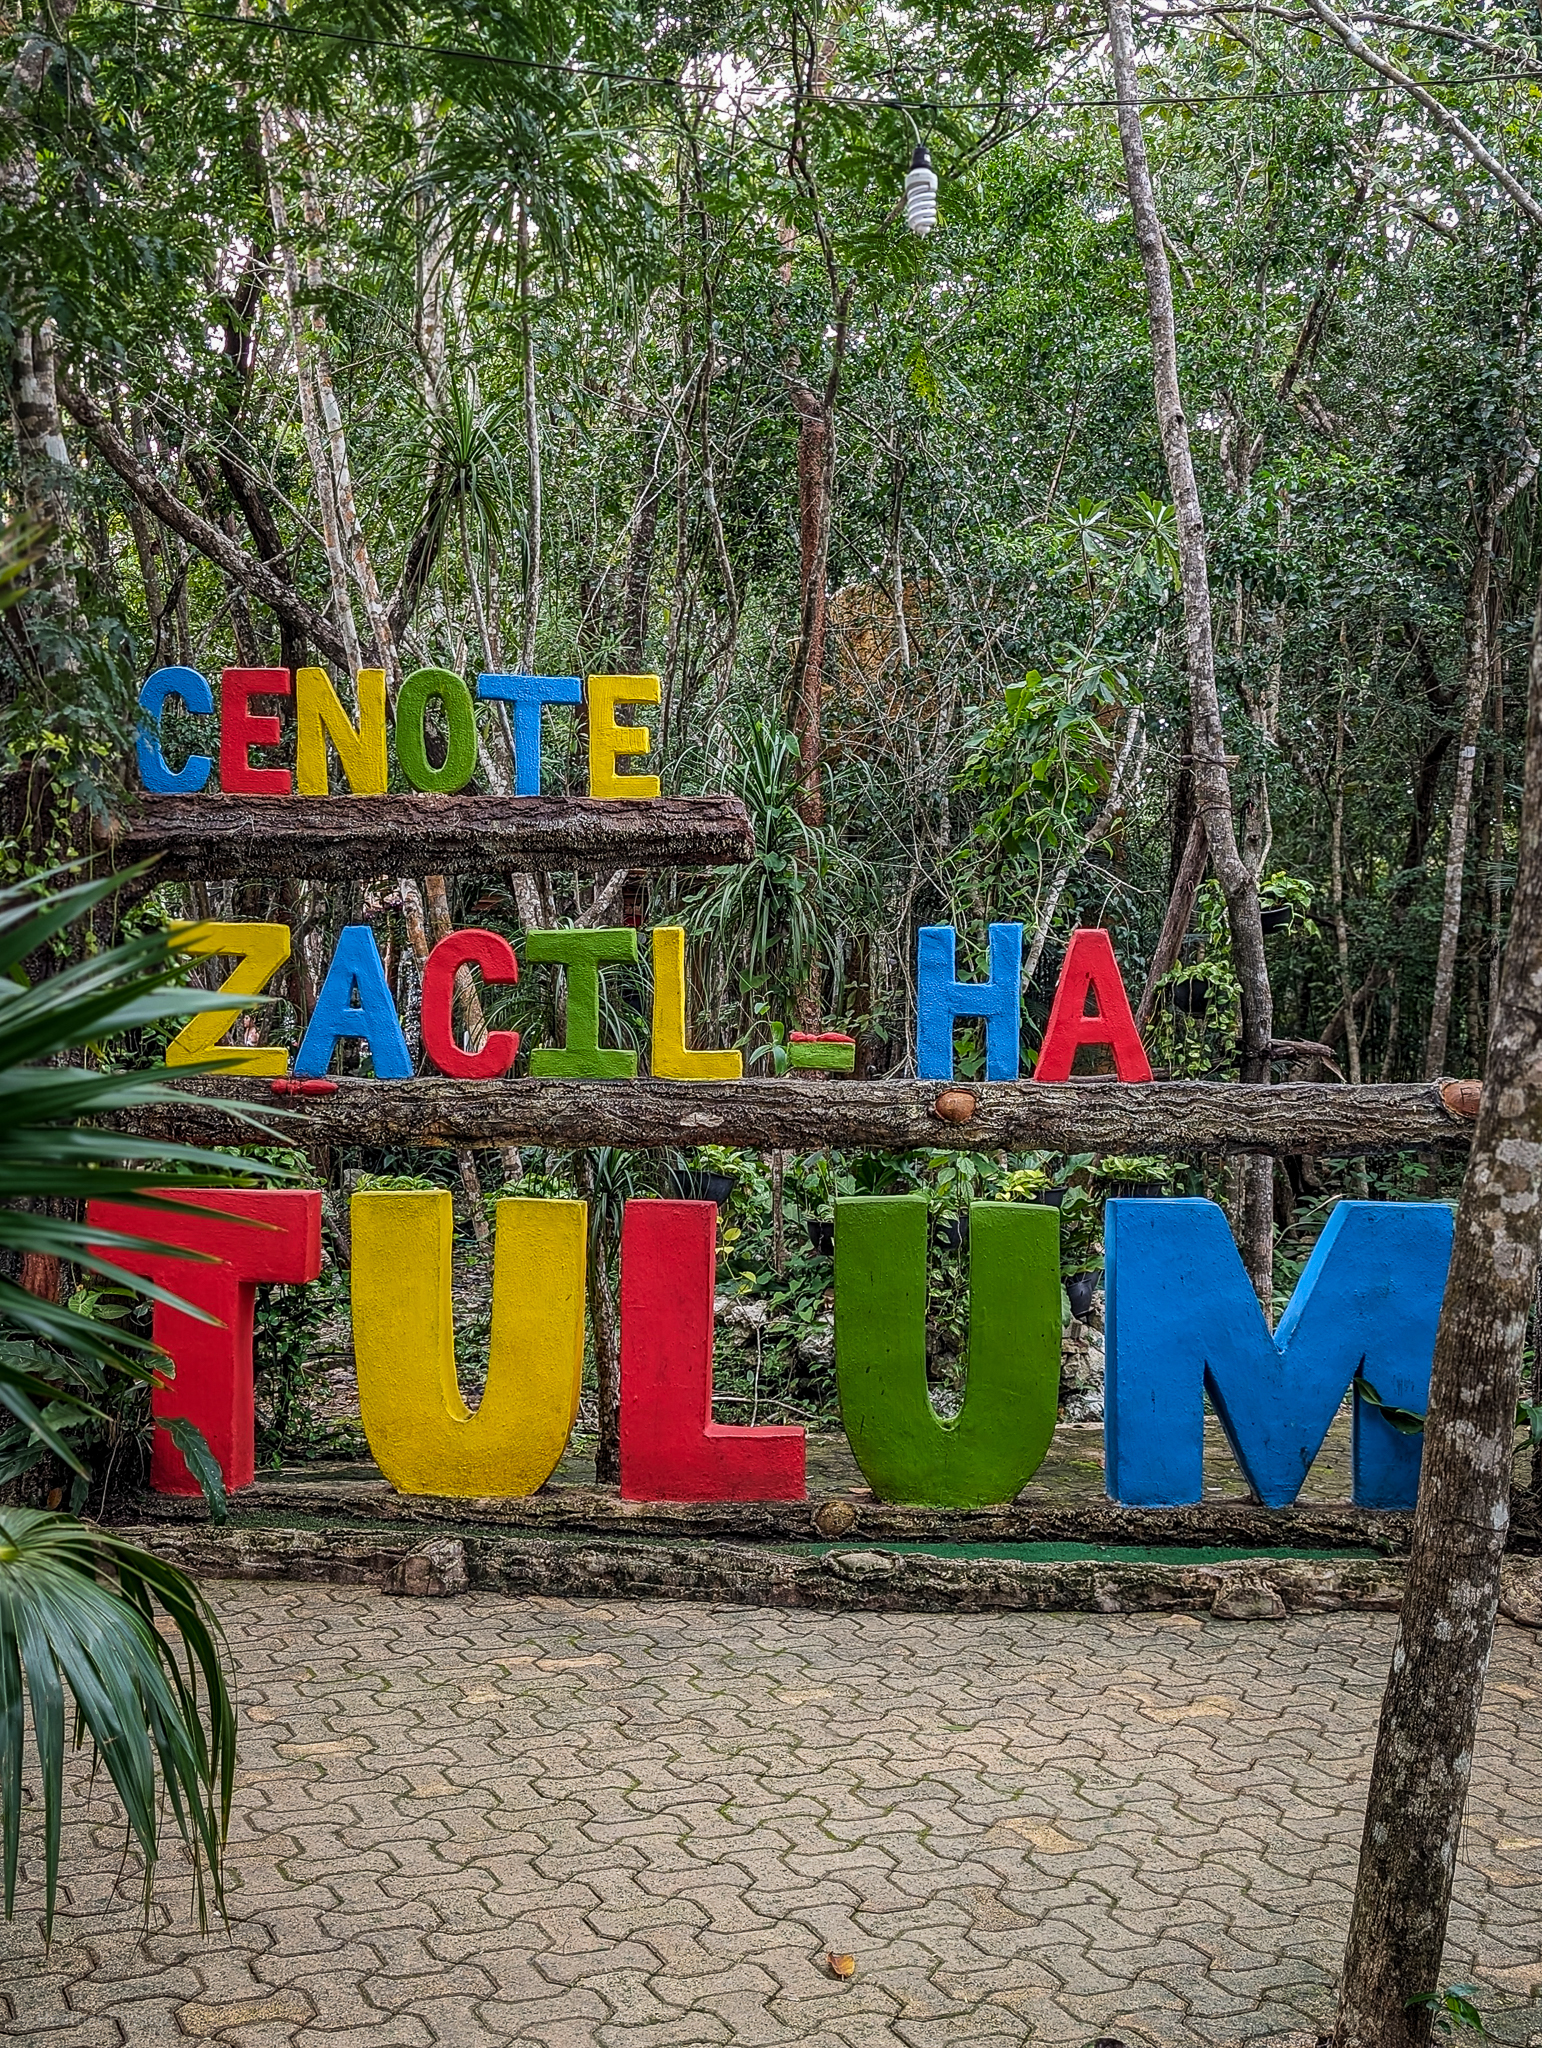 A colorful sign spelling out "CENOTE ZACIL-HA TULUM" in bold, block letters, set against the dense greenery of the jungle near Tulum, Mexico, inviting visitors to the natural sinkhole.